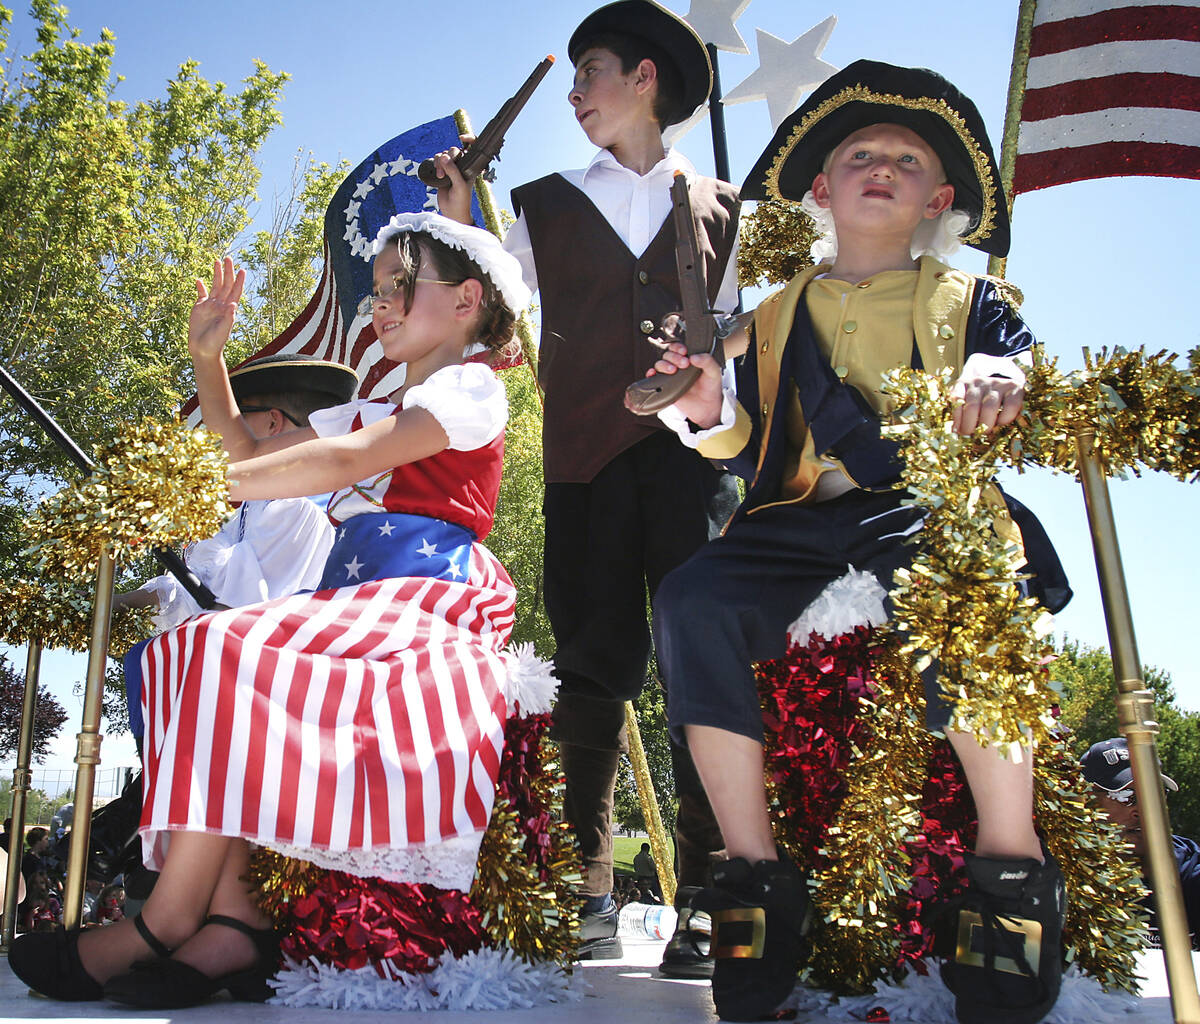 In this 2009 file photo, the founding fathers and mother enjoy their ride on a patriotic float ...